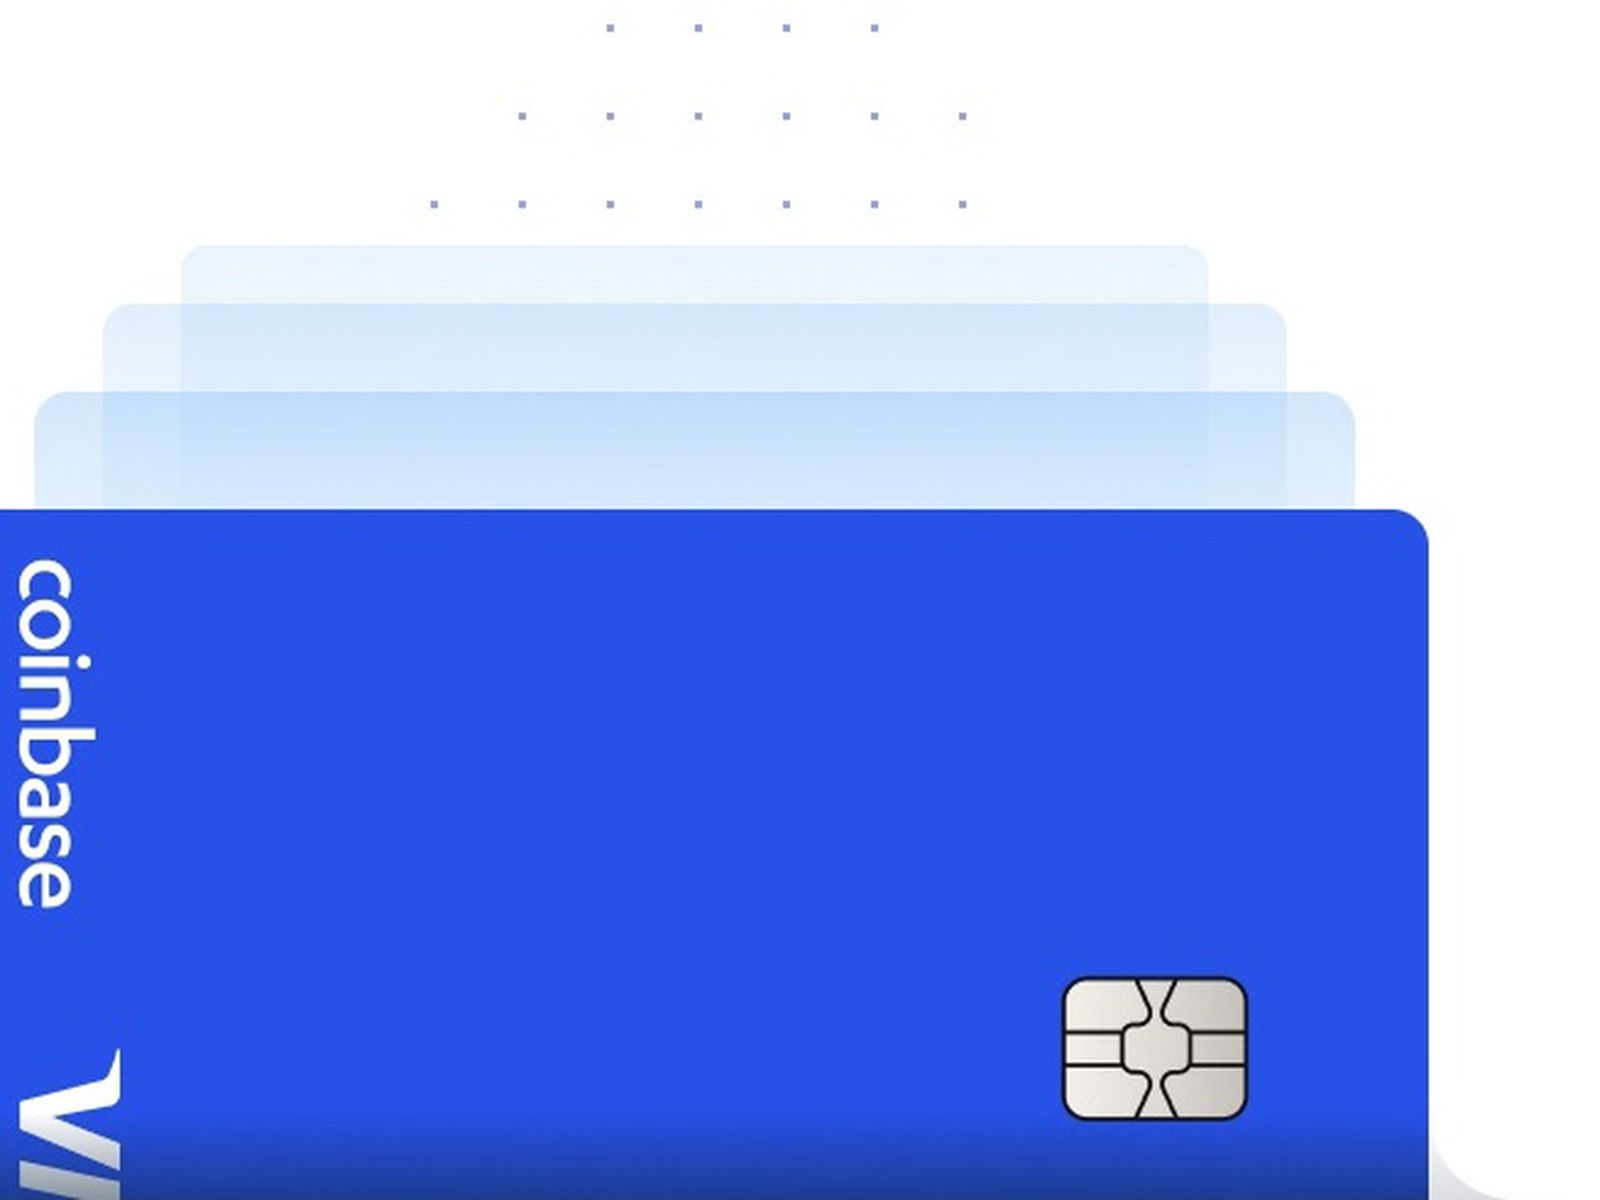 Coinbase Just Debuted the First Bitcoin Debit Card in the US